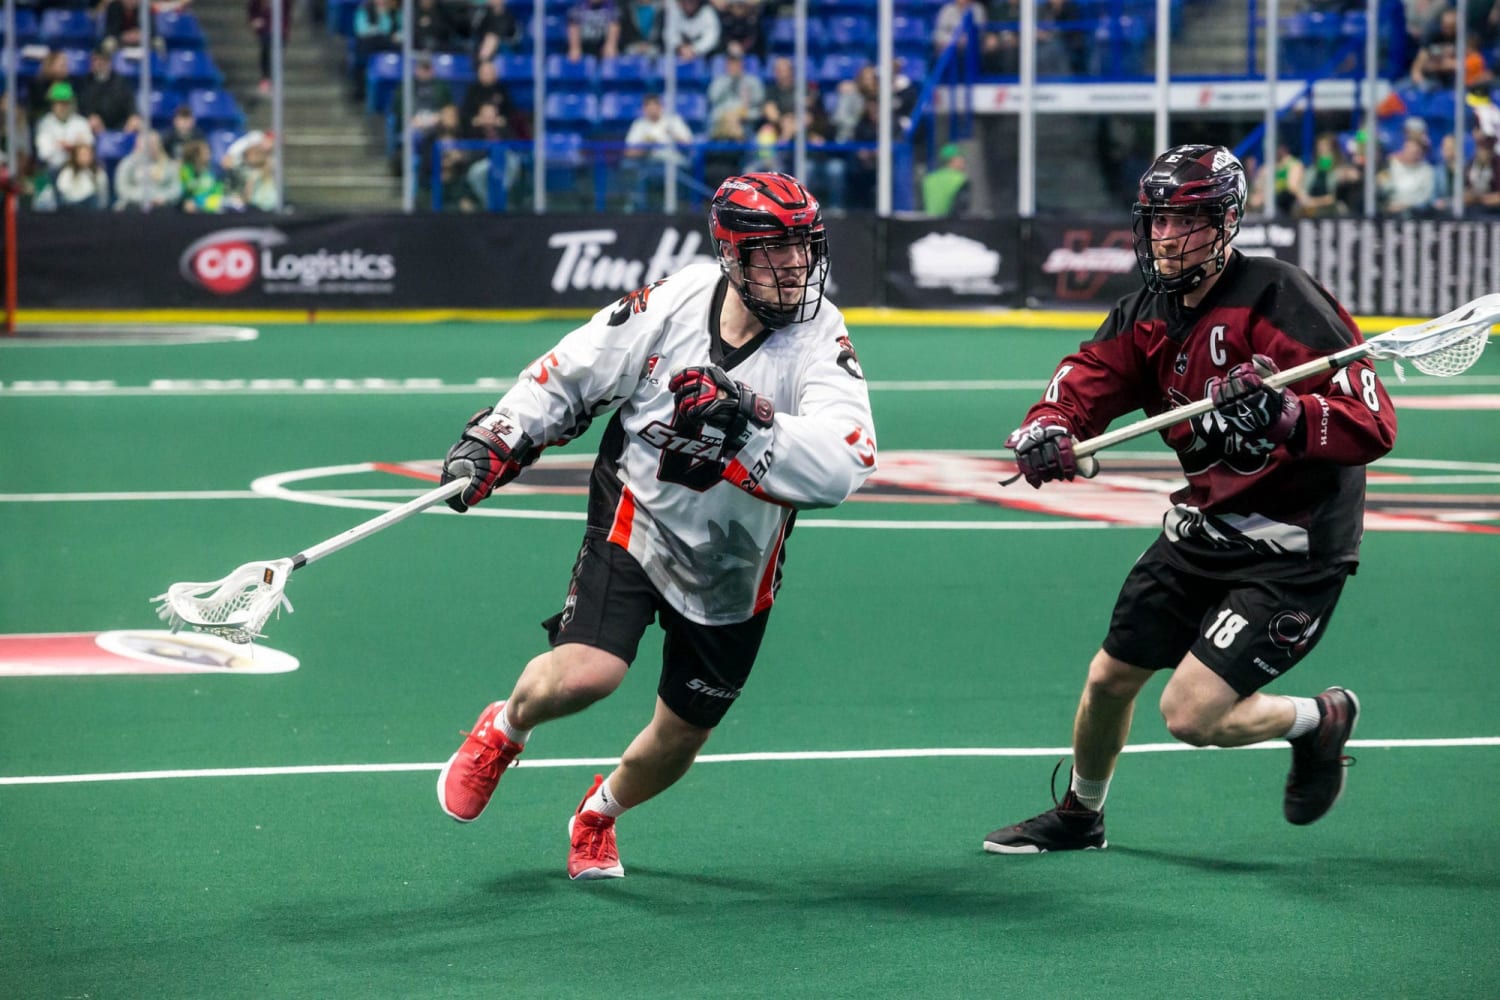 Paul Rabil Moved To Protected Player List - Toronto Rock